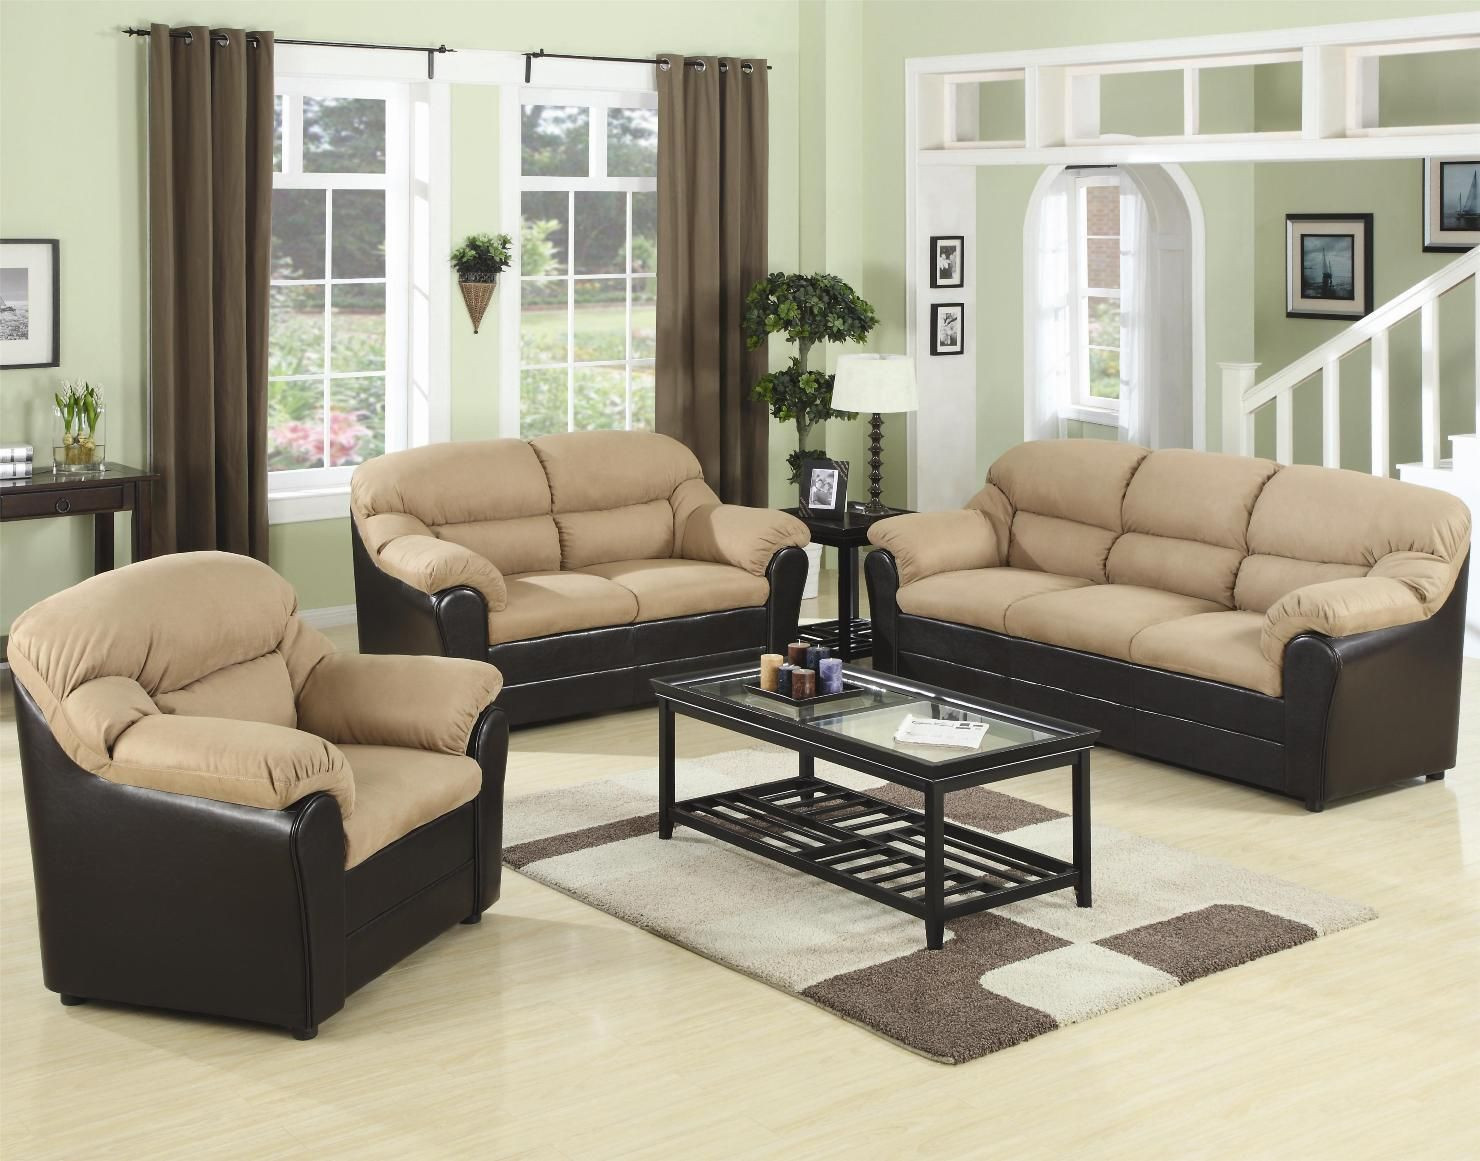 Modern Living Room Sets Cheap
 Leather sofa outlets for unique and charming designs at